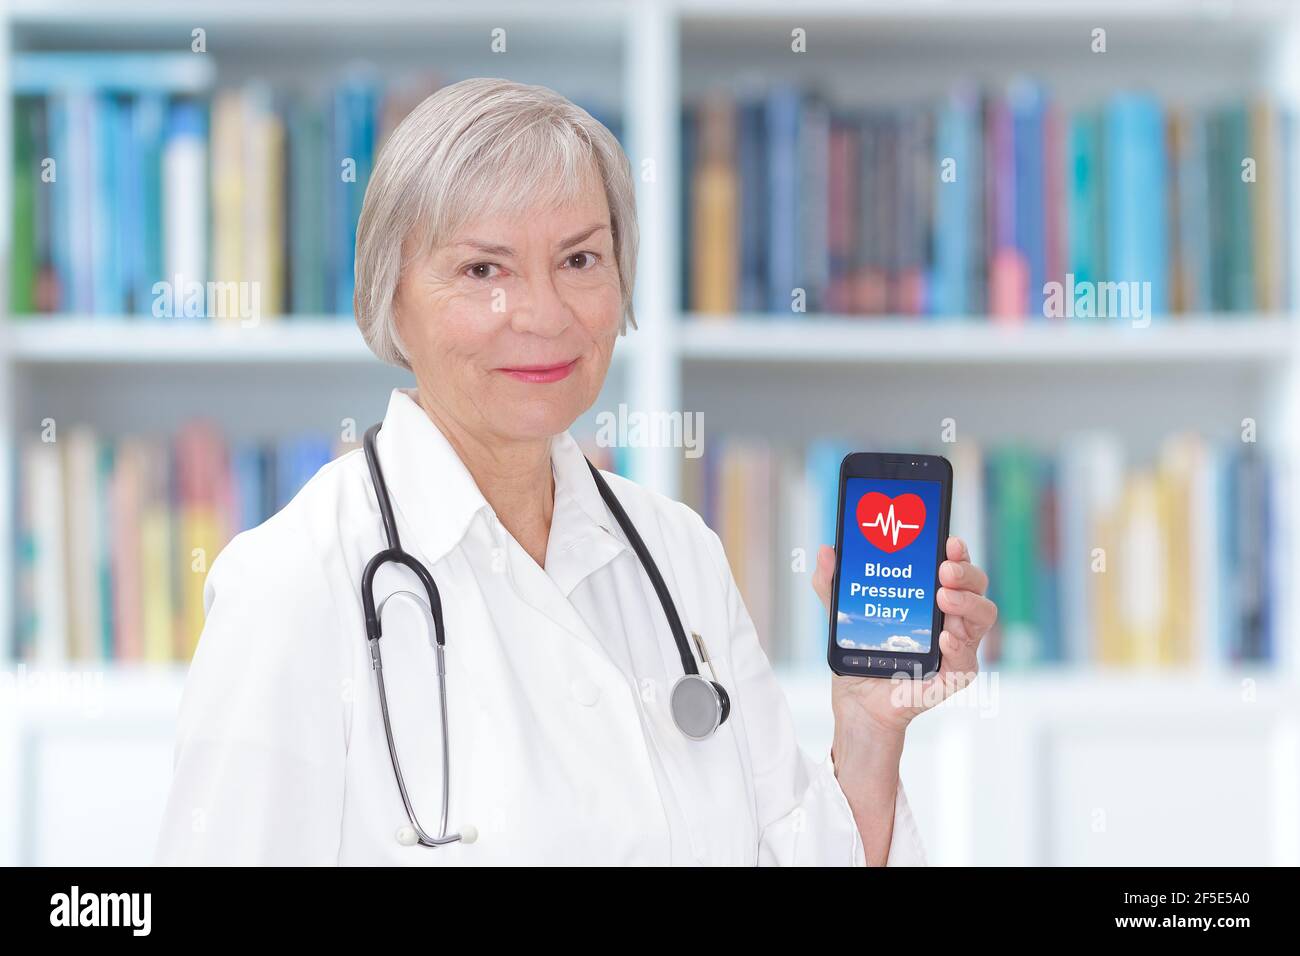 Friendly senior doctor with a smartphone showing a blood pressure diary app, mobile health concept. Stock Photo